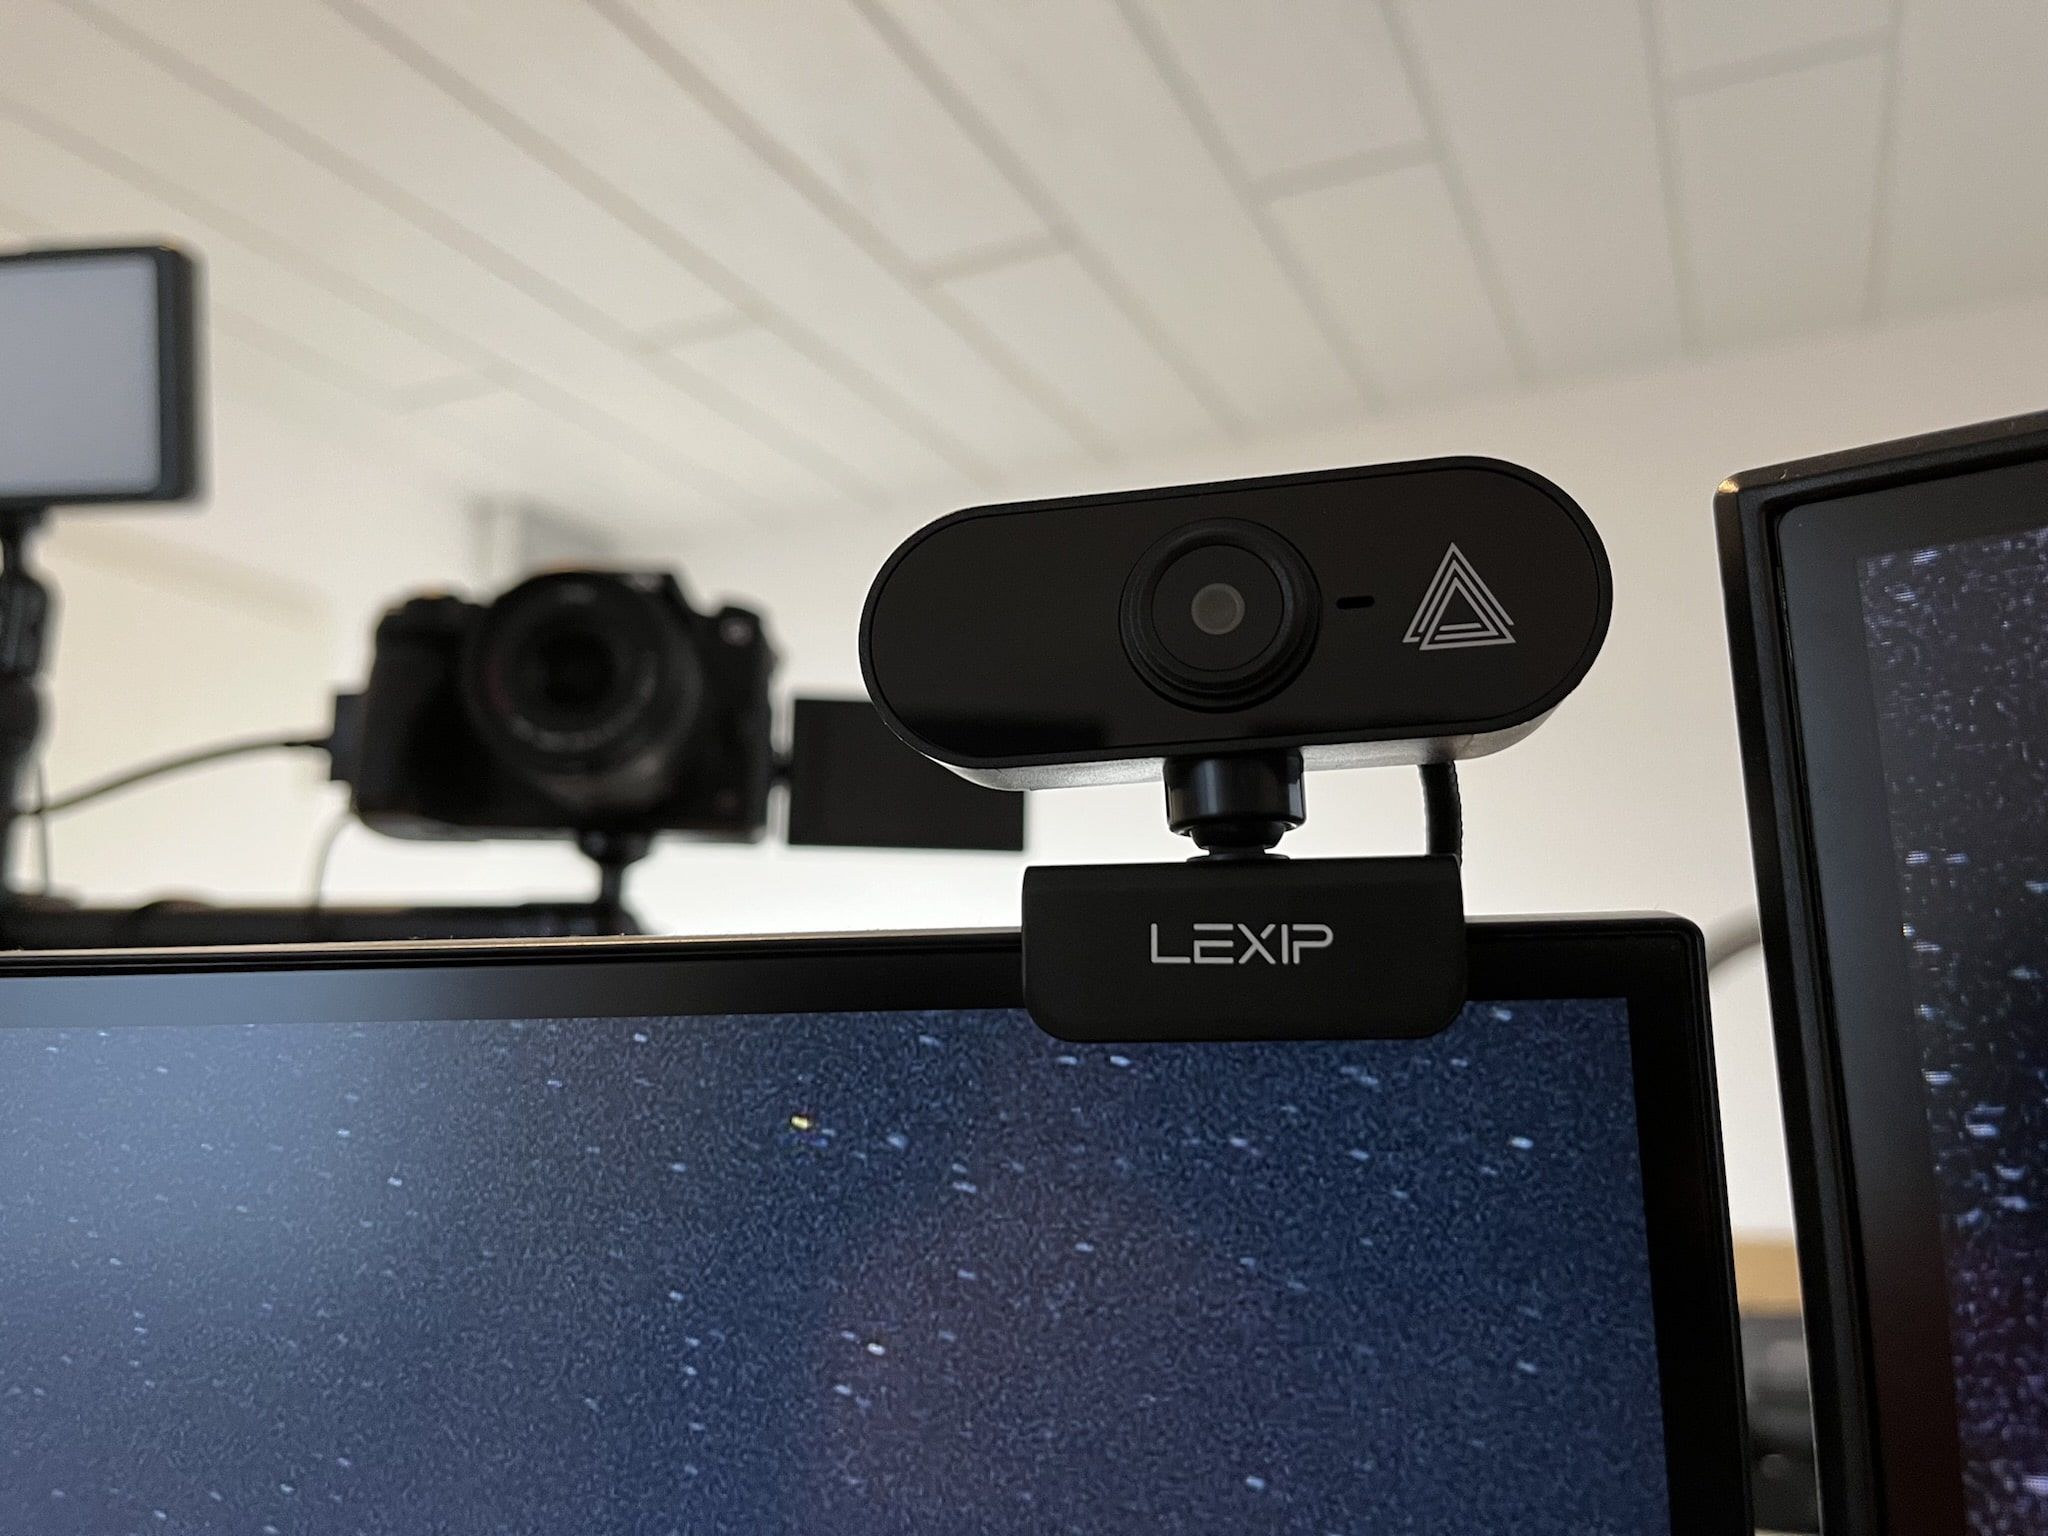 How To Attach Webcam To Monitor